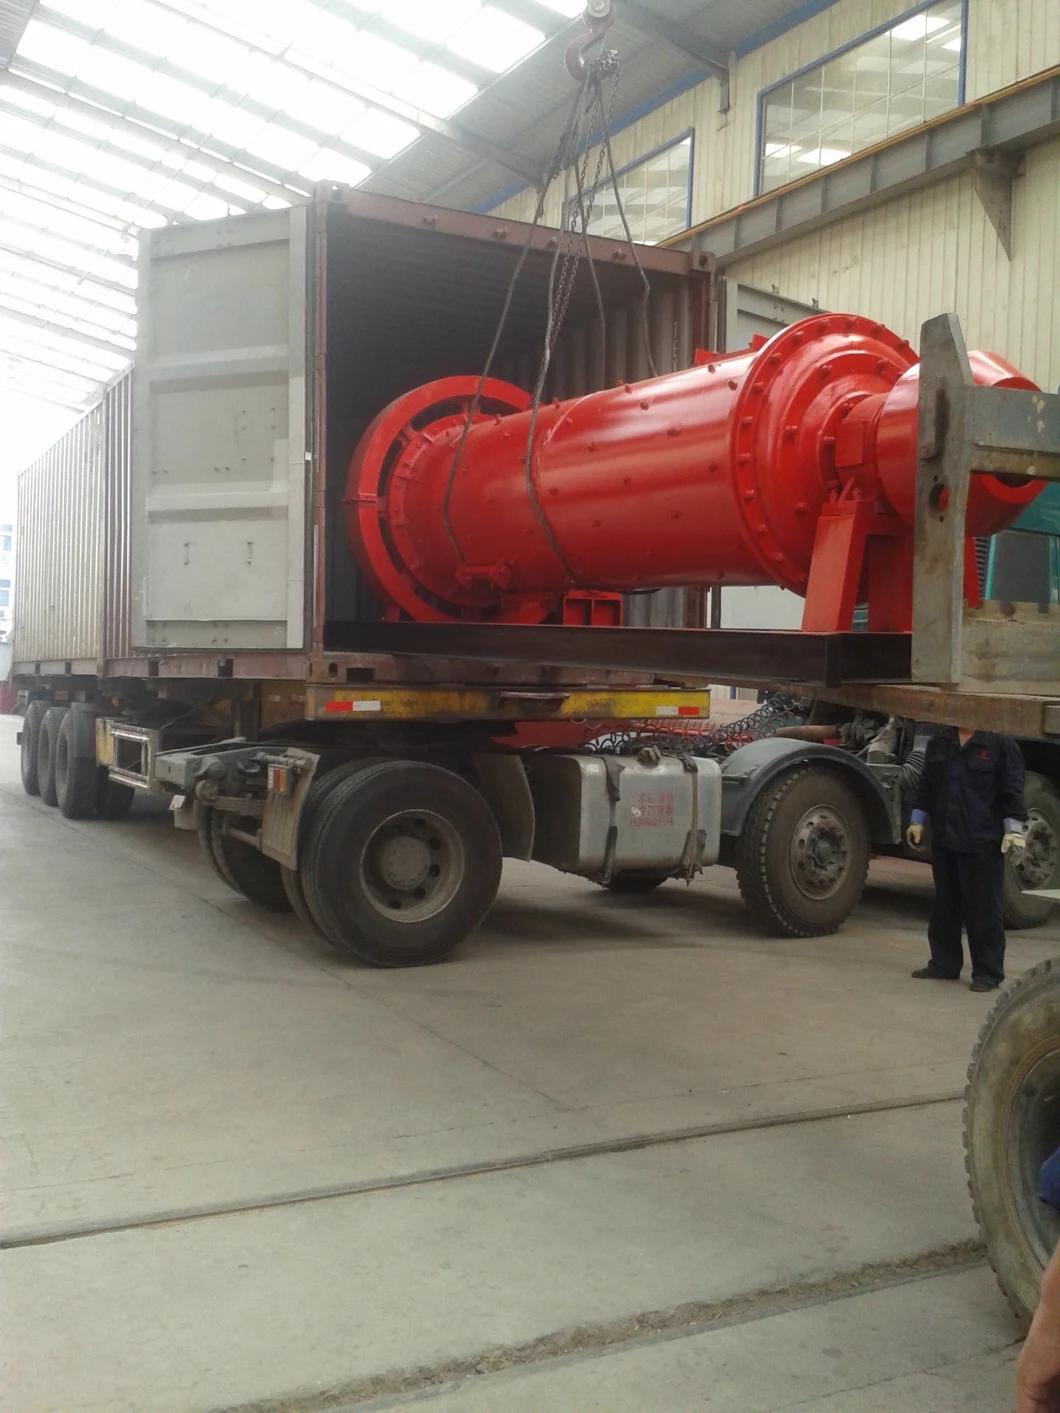 Small Ball Mill Rock Crushers, Gold Ball Mill Grinder, Diesel Drive Fine Grinding Ball Mill